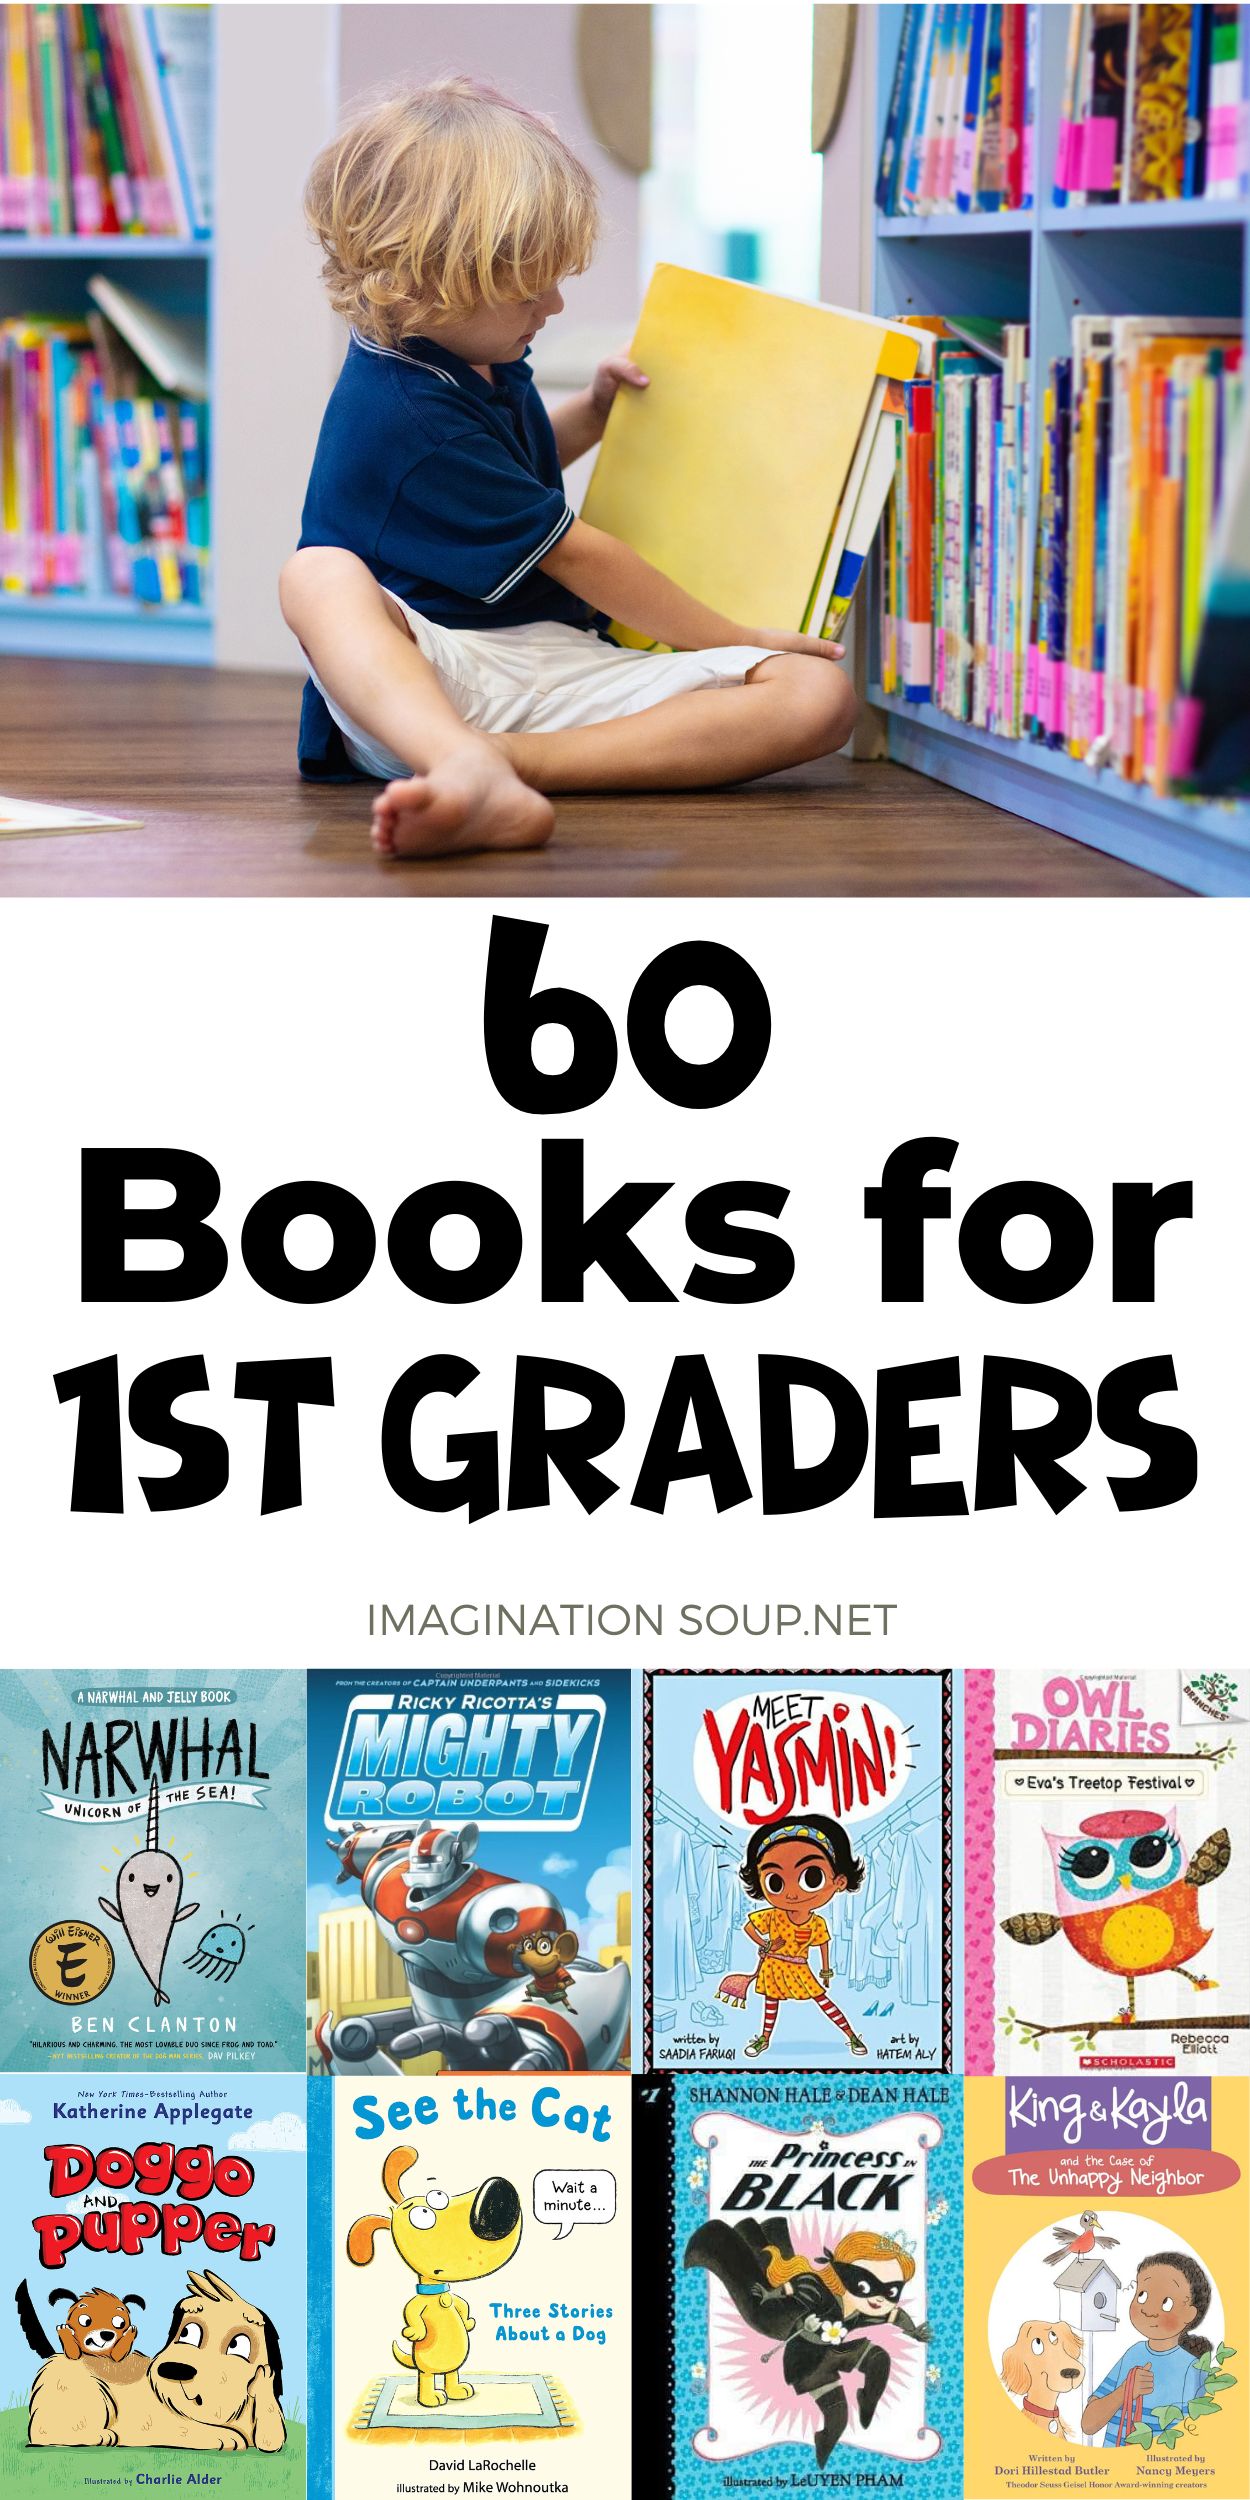 Find the best easy (beginning) chapter books for 1st graders, 6-year-olds, in early elementary school. At this stage, kids learning to read may be ready for the easiest chapter books like the titles on this list. As a former teacher and a parent, I know how important it is to find engaging books for kids. Keep reading to find my top picks to share with your children or students.